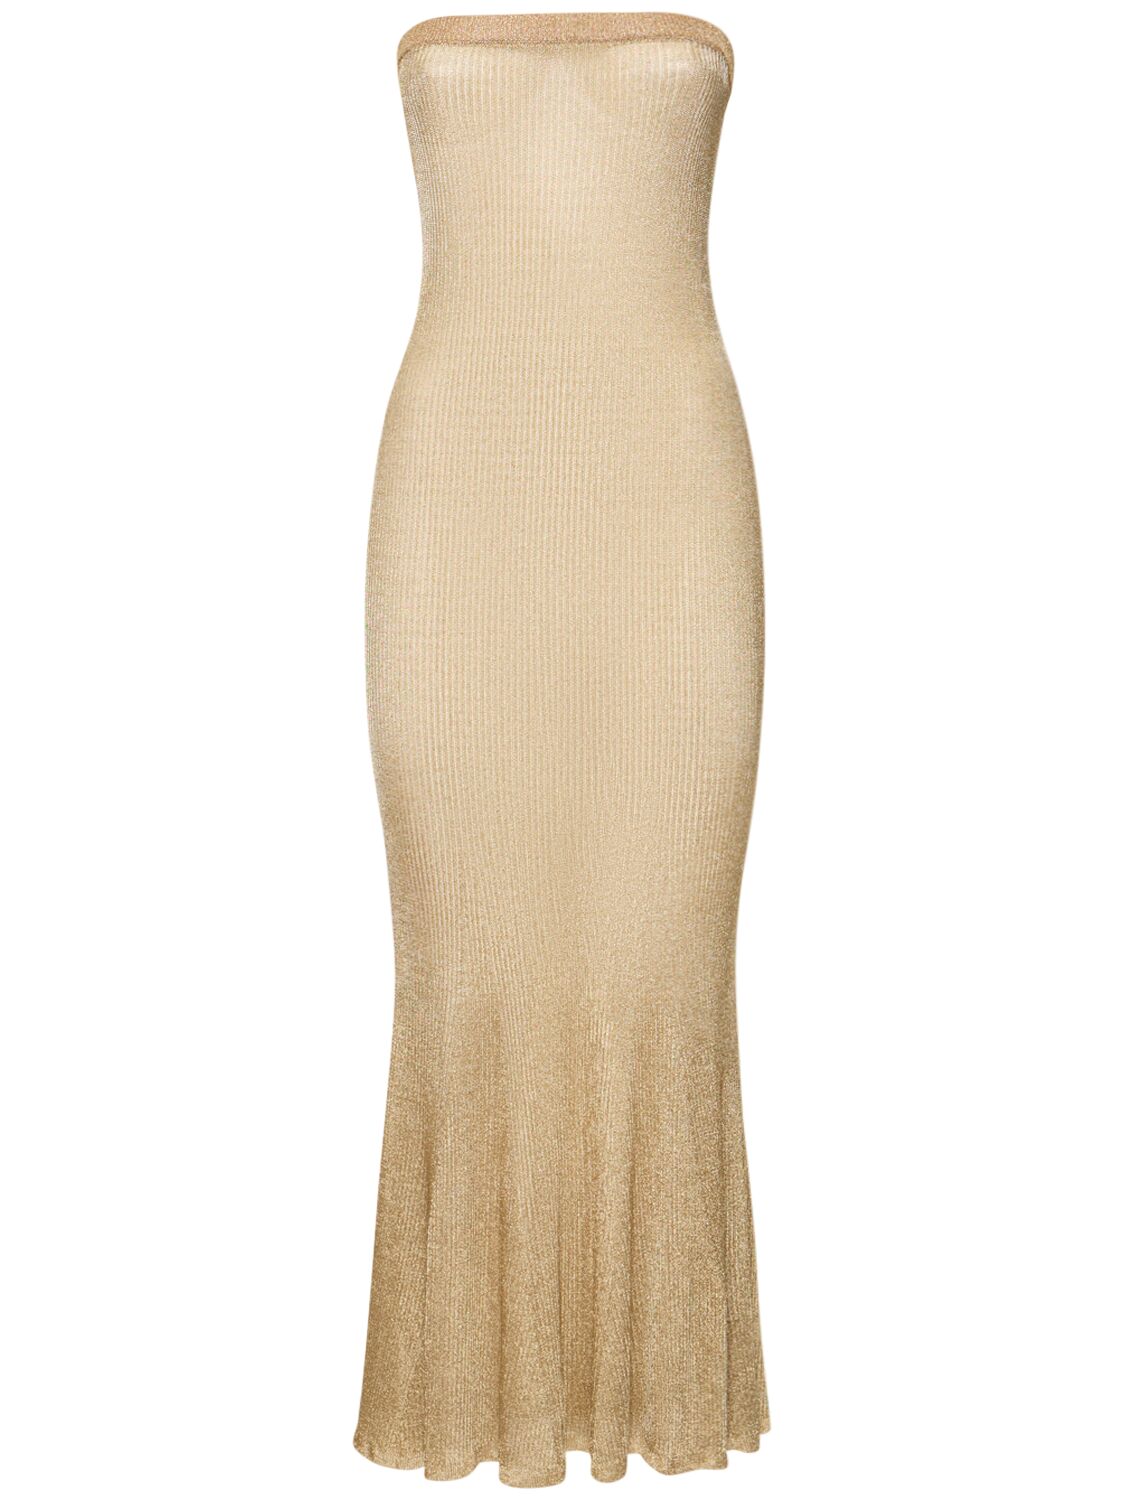 Image of The Cage Cotton Blend Midi Dress